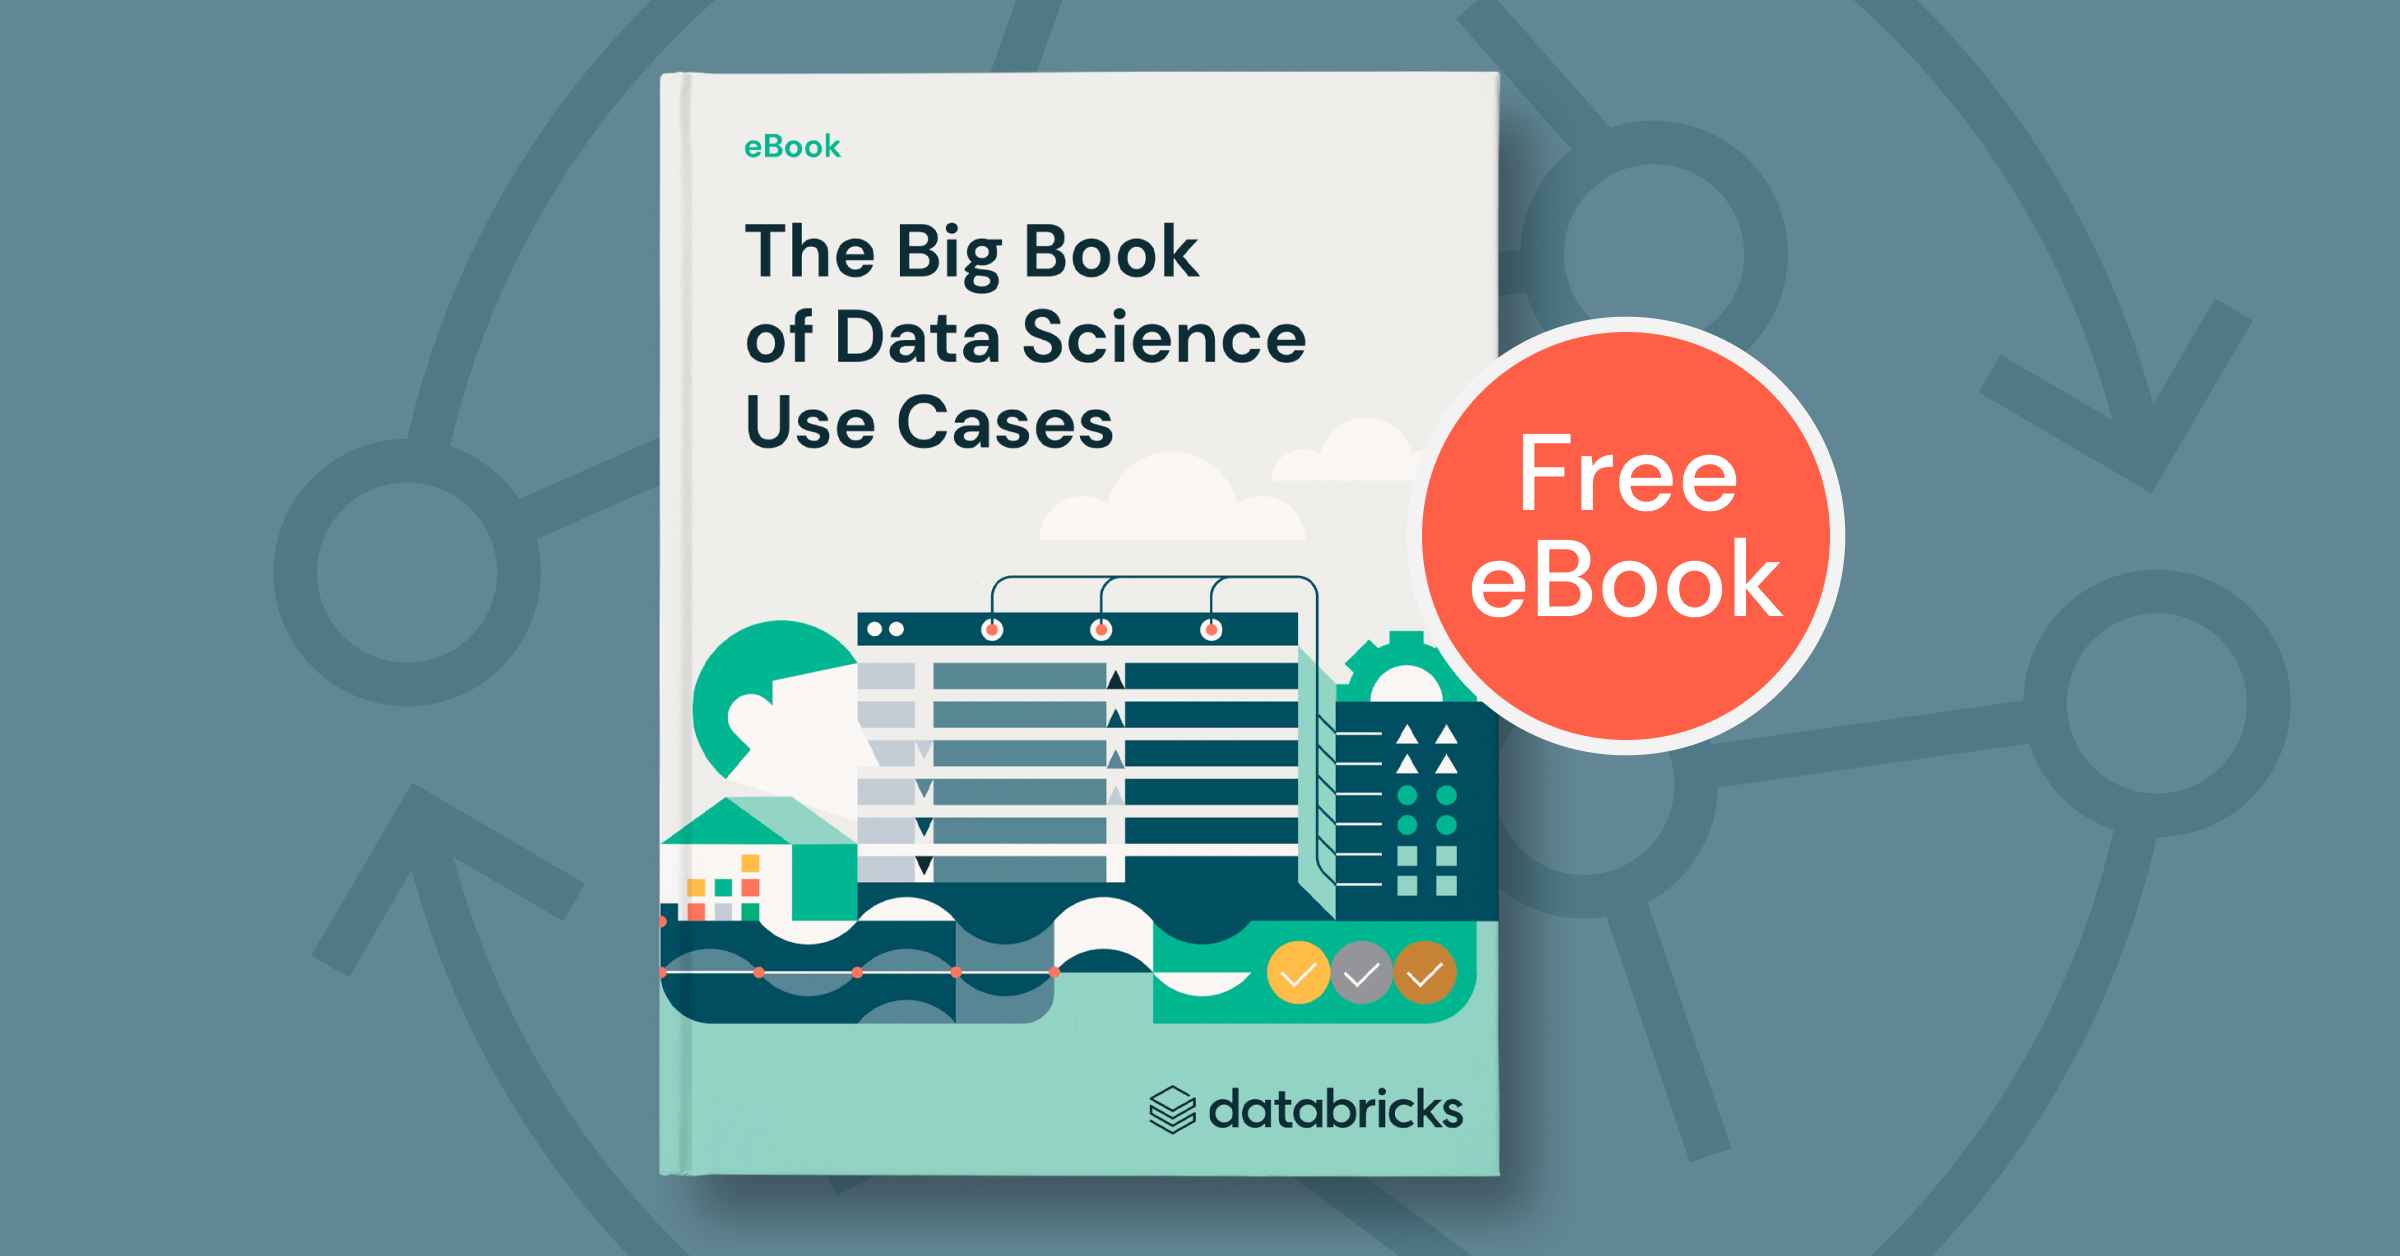 The big book of machine learning use cases